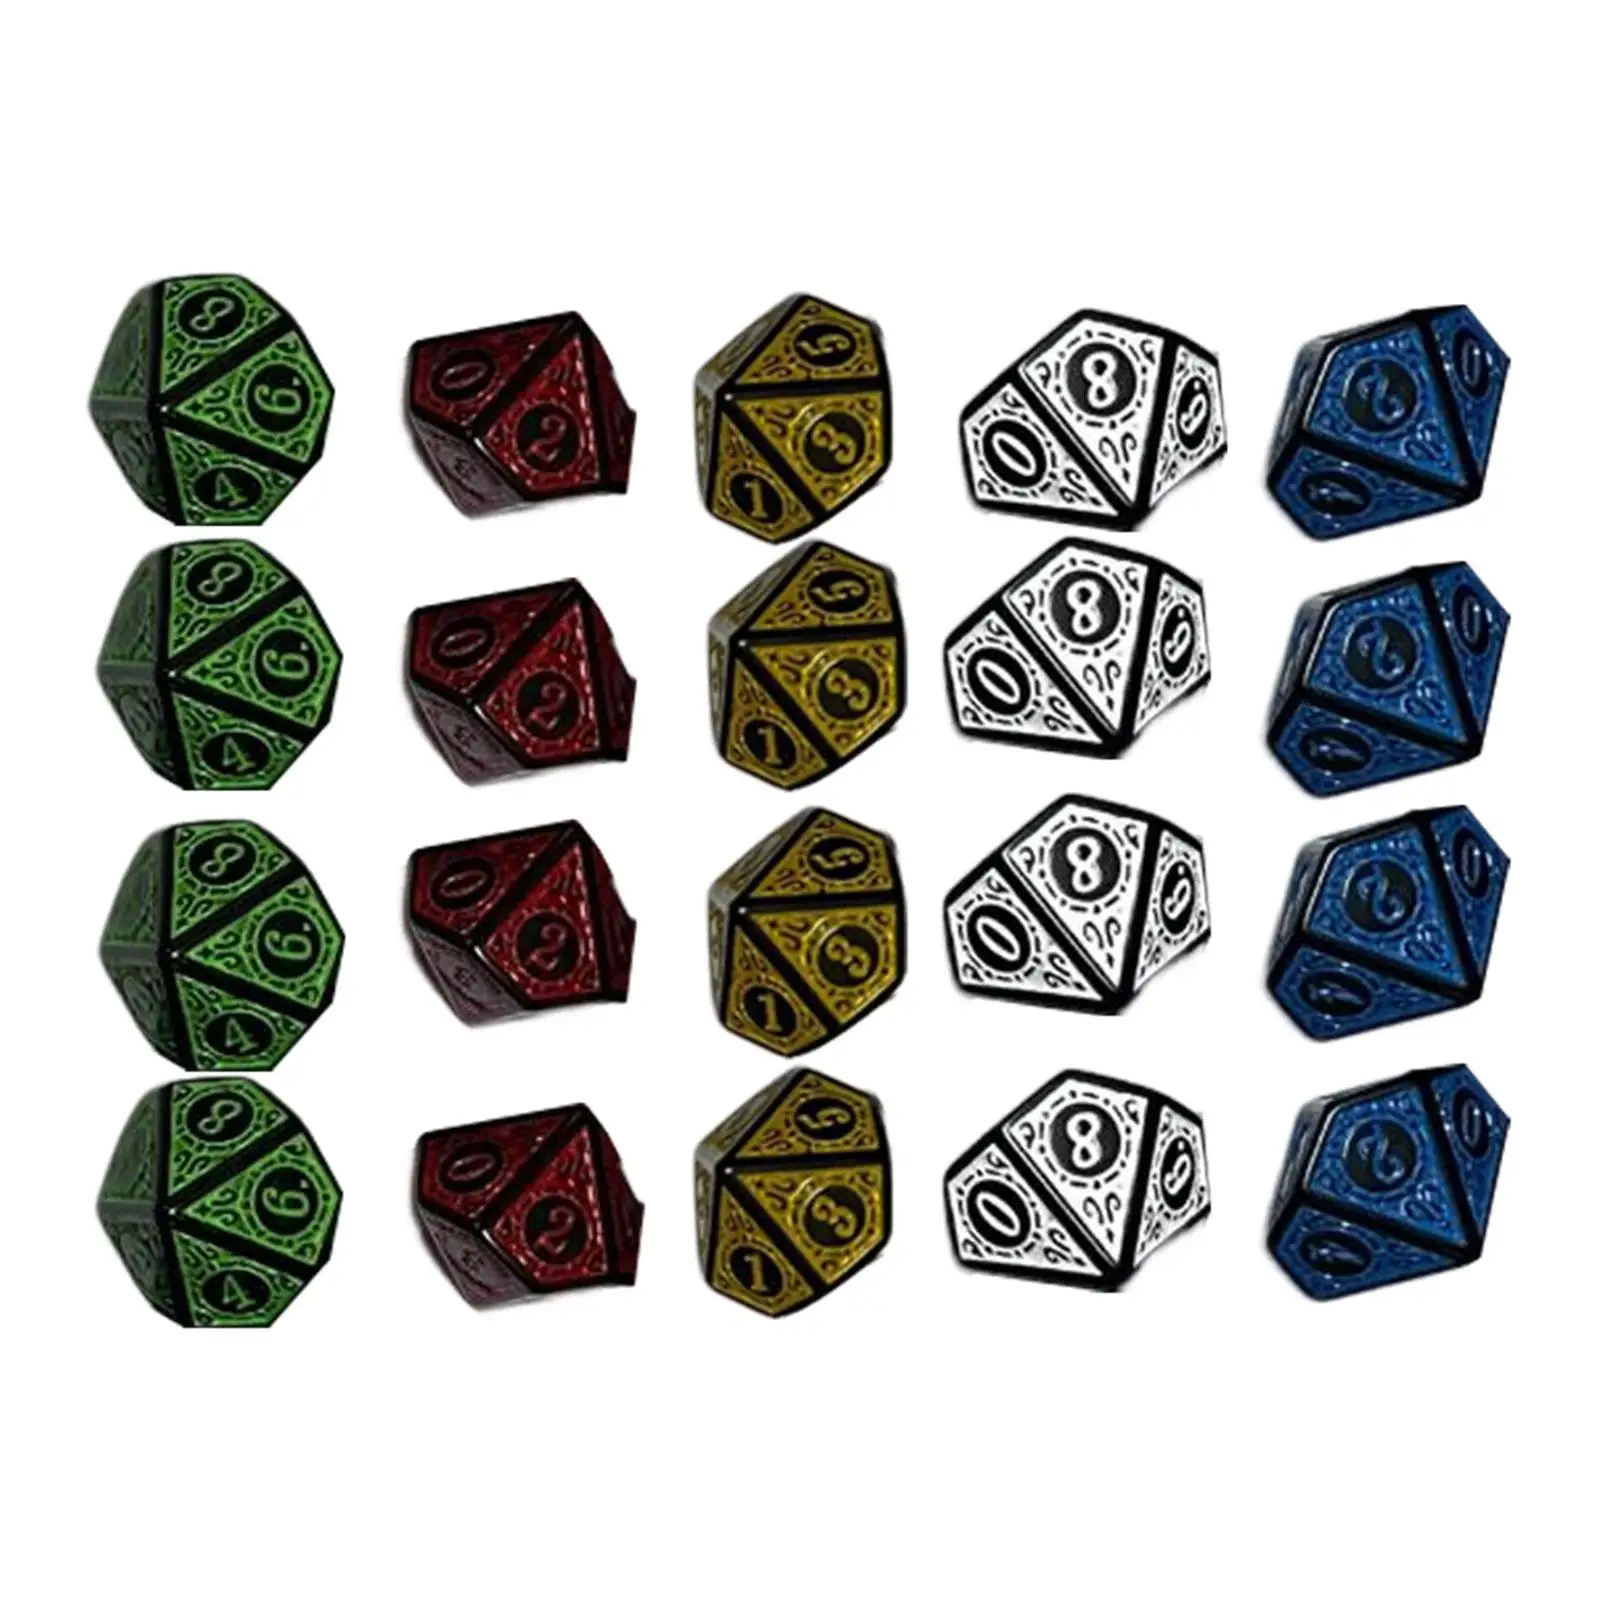 20Pcs D10 10 Sided Dice Set Table Games for MTG Bar Toys,Role Playing Games,16mm Acrylic Dice